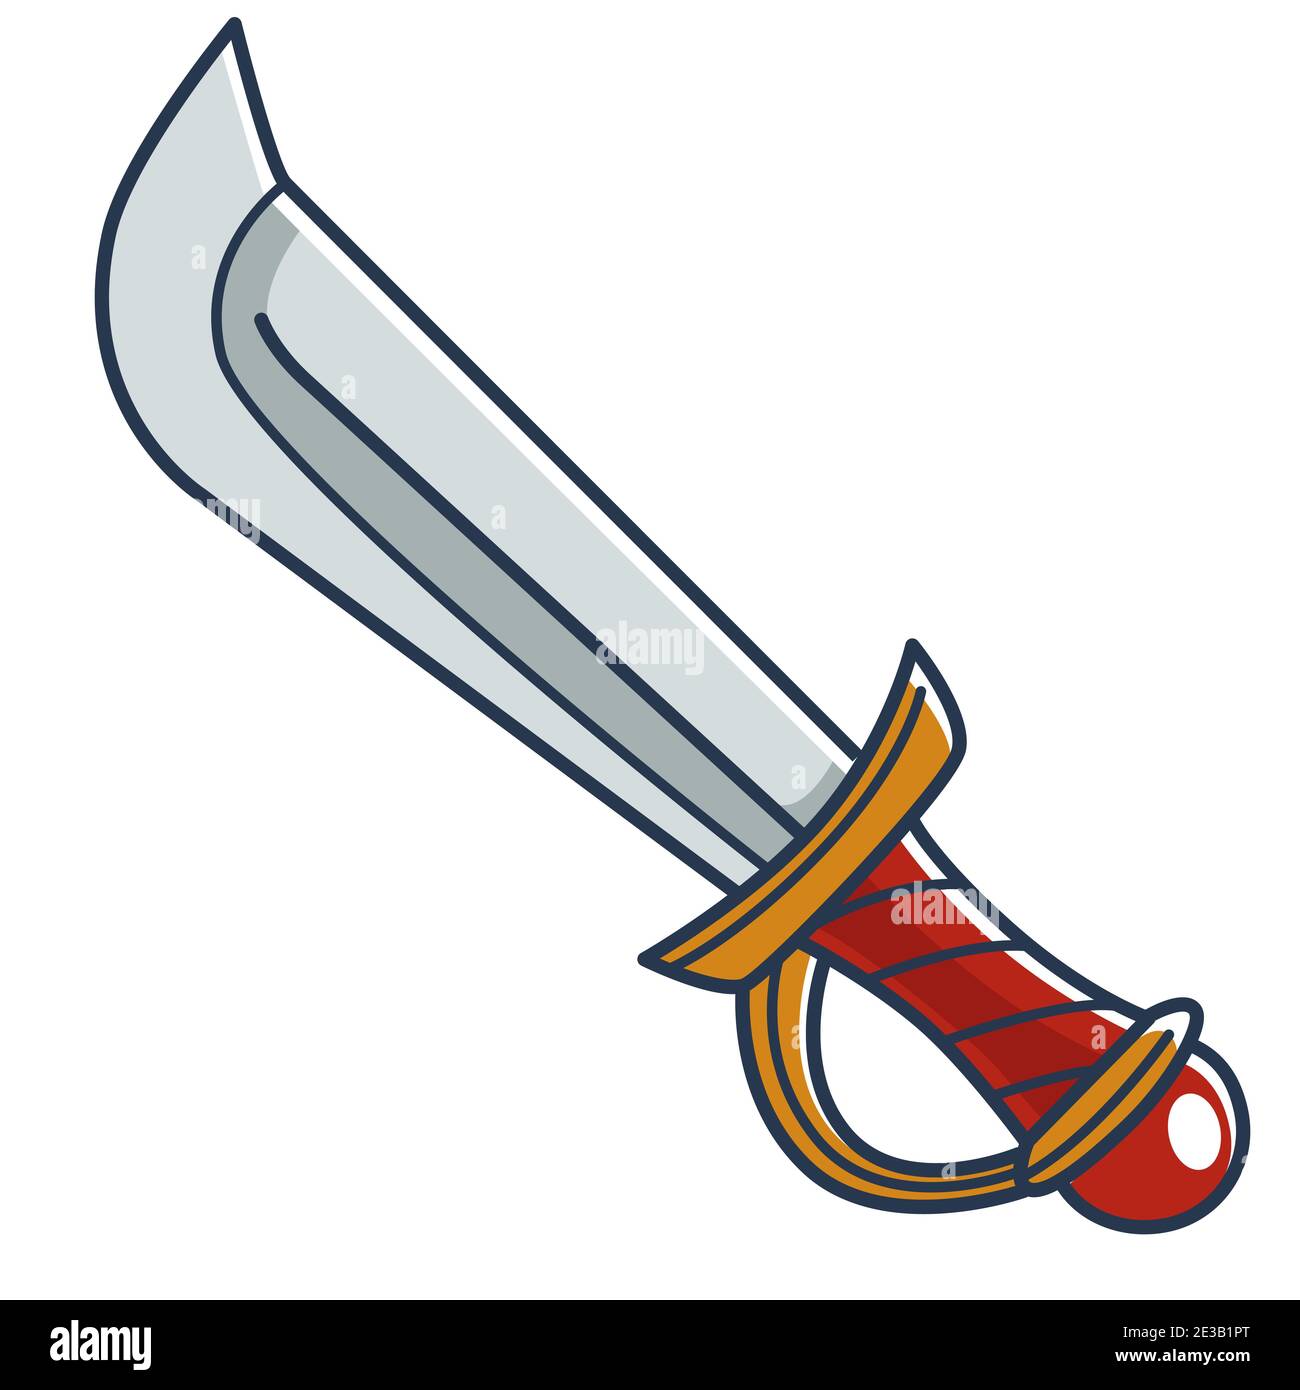 Plastic sword for kids to play, toy or real blade Stock Vector